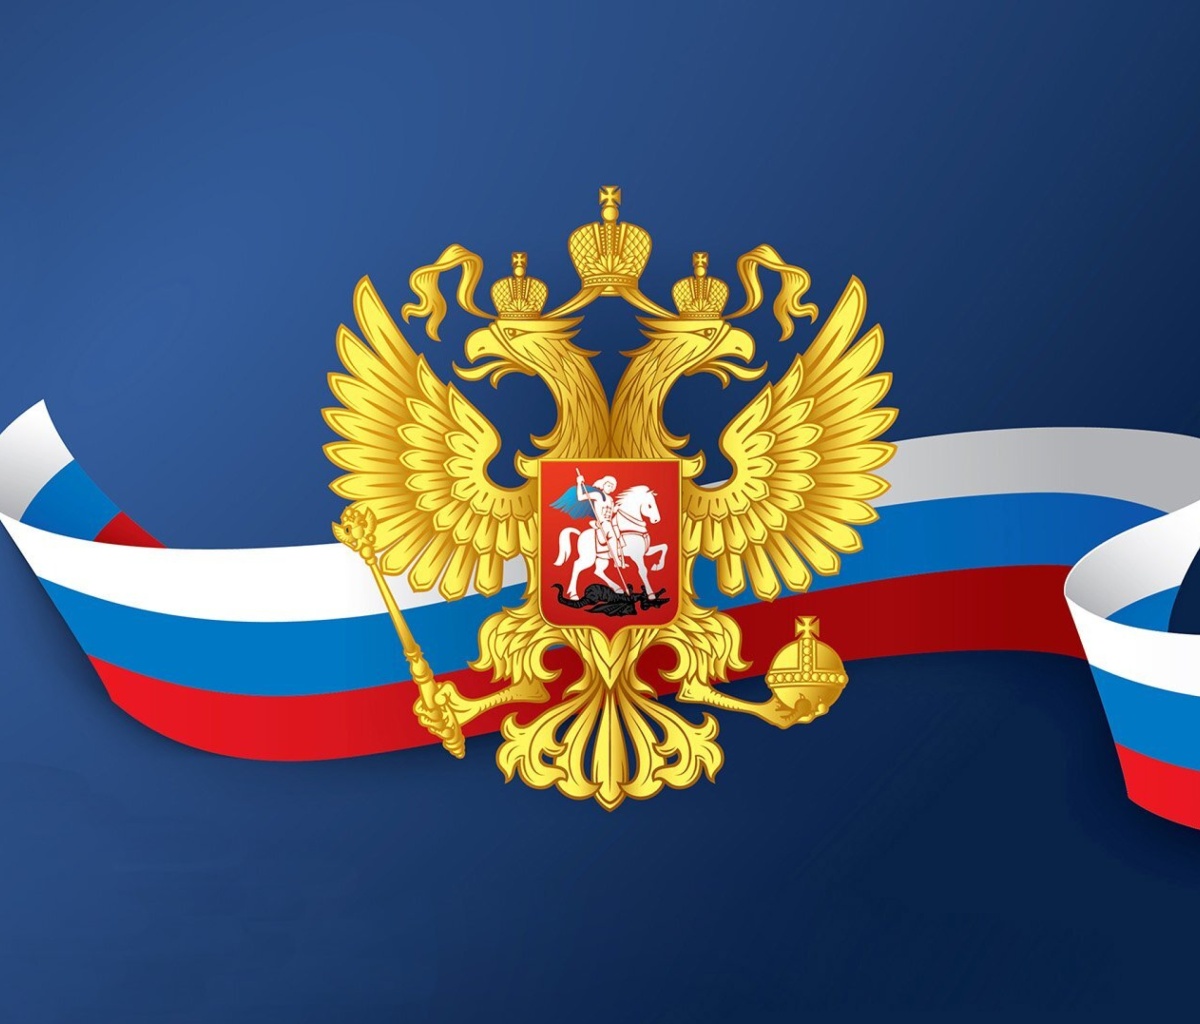 Russian coat of arms and flag screenshot #1 1200x1024